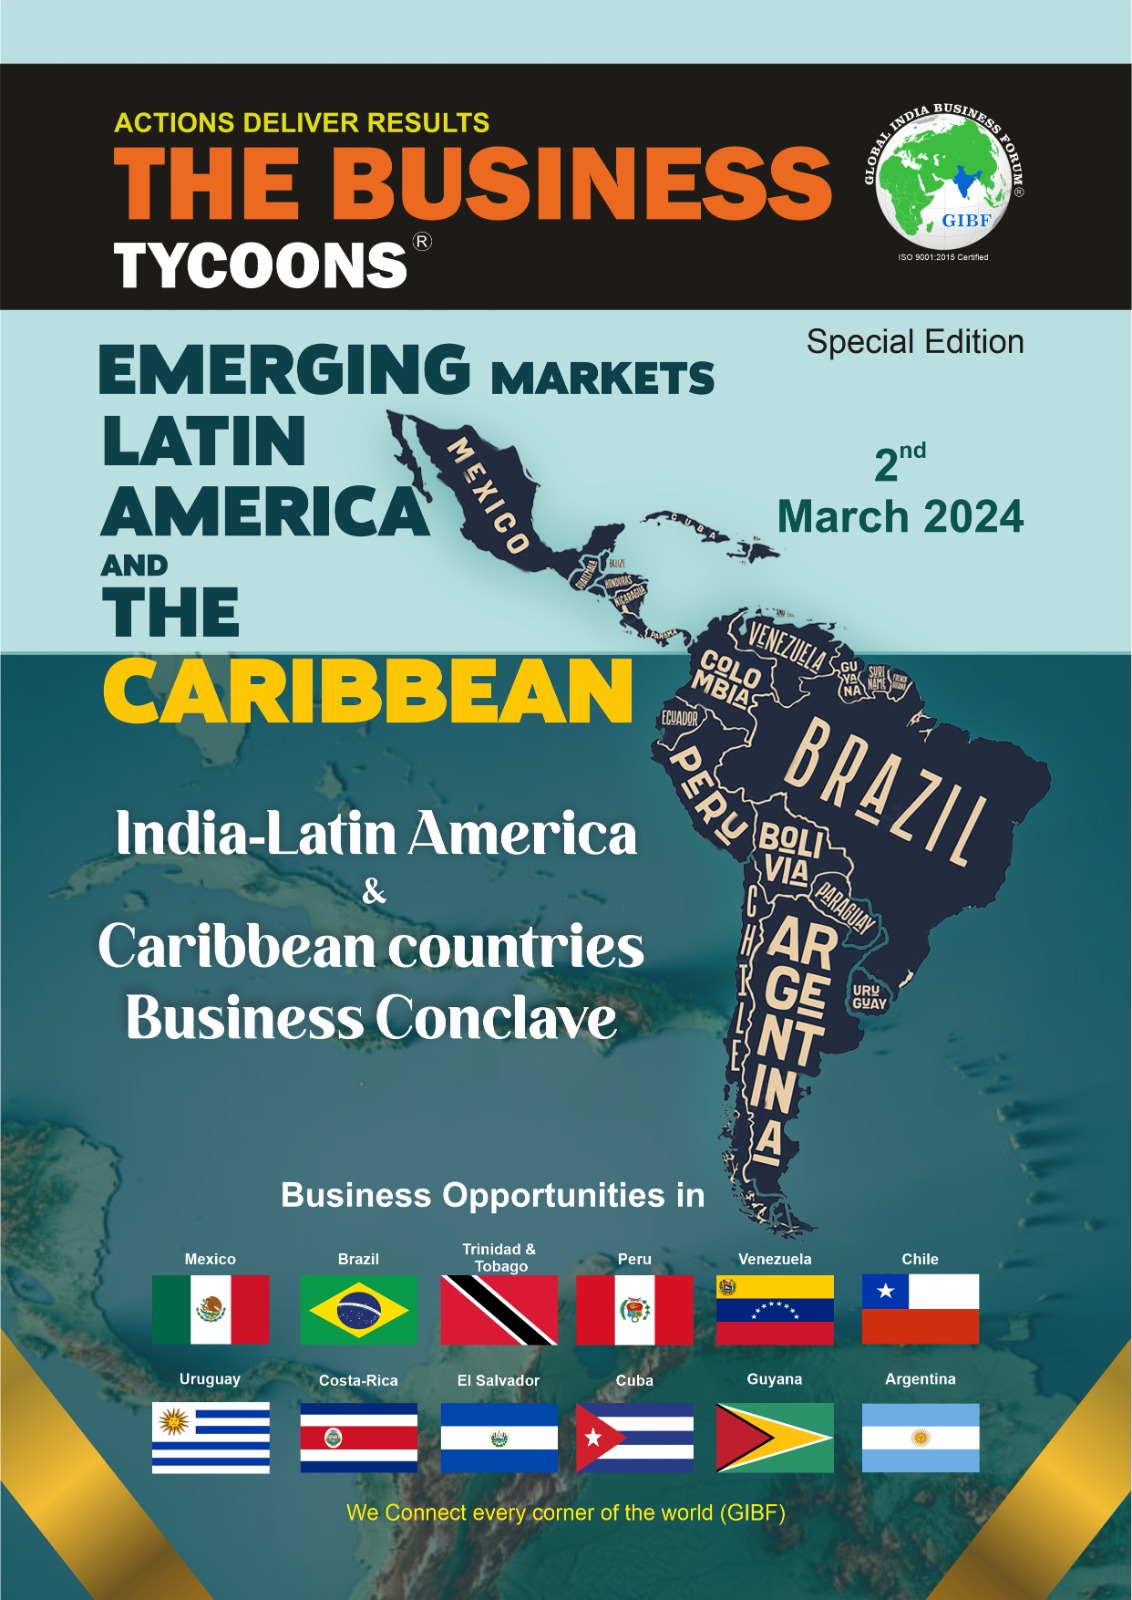 The Business Tycoons - Emerging Markets - Latin America and The Caribbean